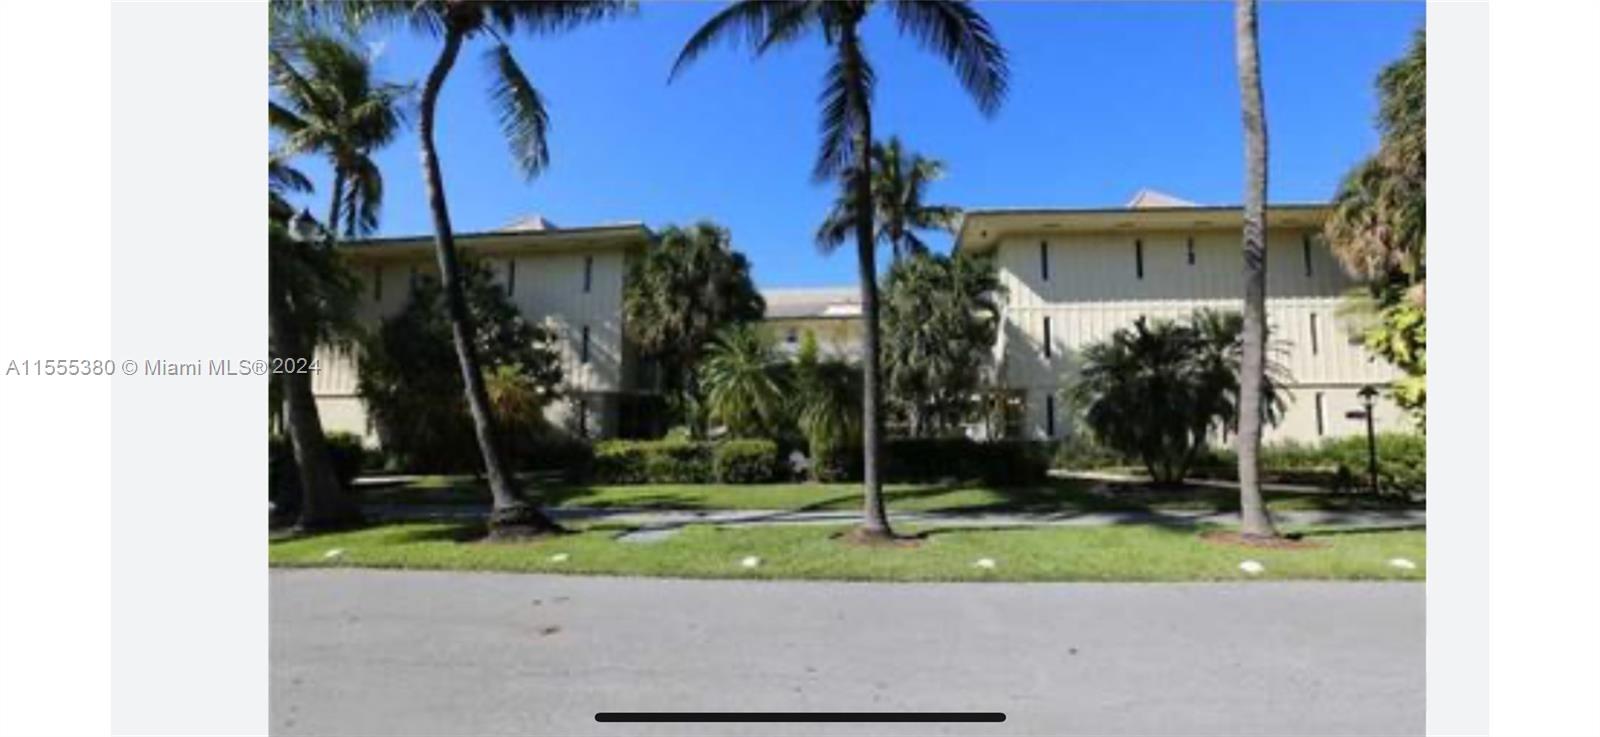 Beautiful apartment in the sought after Cay Polynesia building in Key Biscayne, that is located a short walk to the ocean through a private beach entrance.  This spacious 1 bedroom, 1 bathroom unit on the second floor is 608 sq. ft. of living space with ceramic floors throughout, a fully equipped kitchen and ample closets.  This boutique building has a large pool area, surrounded by lush landscaping.  Must see! No pets.